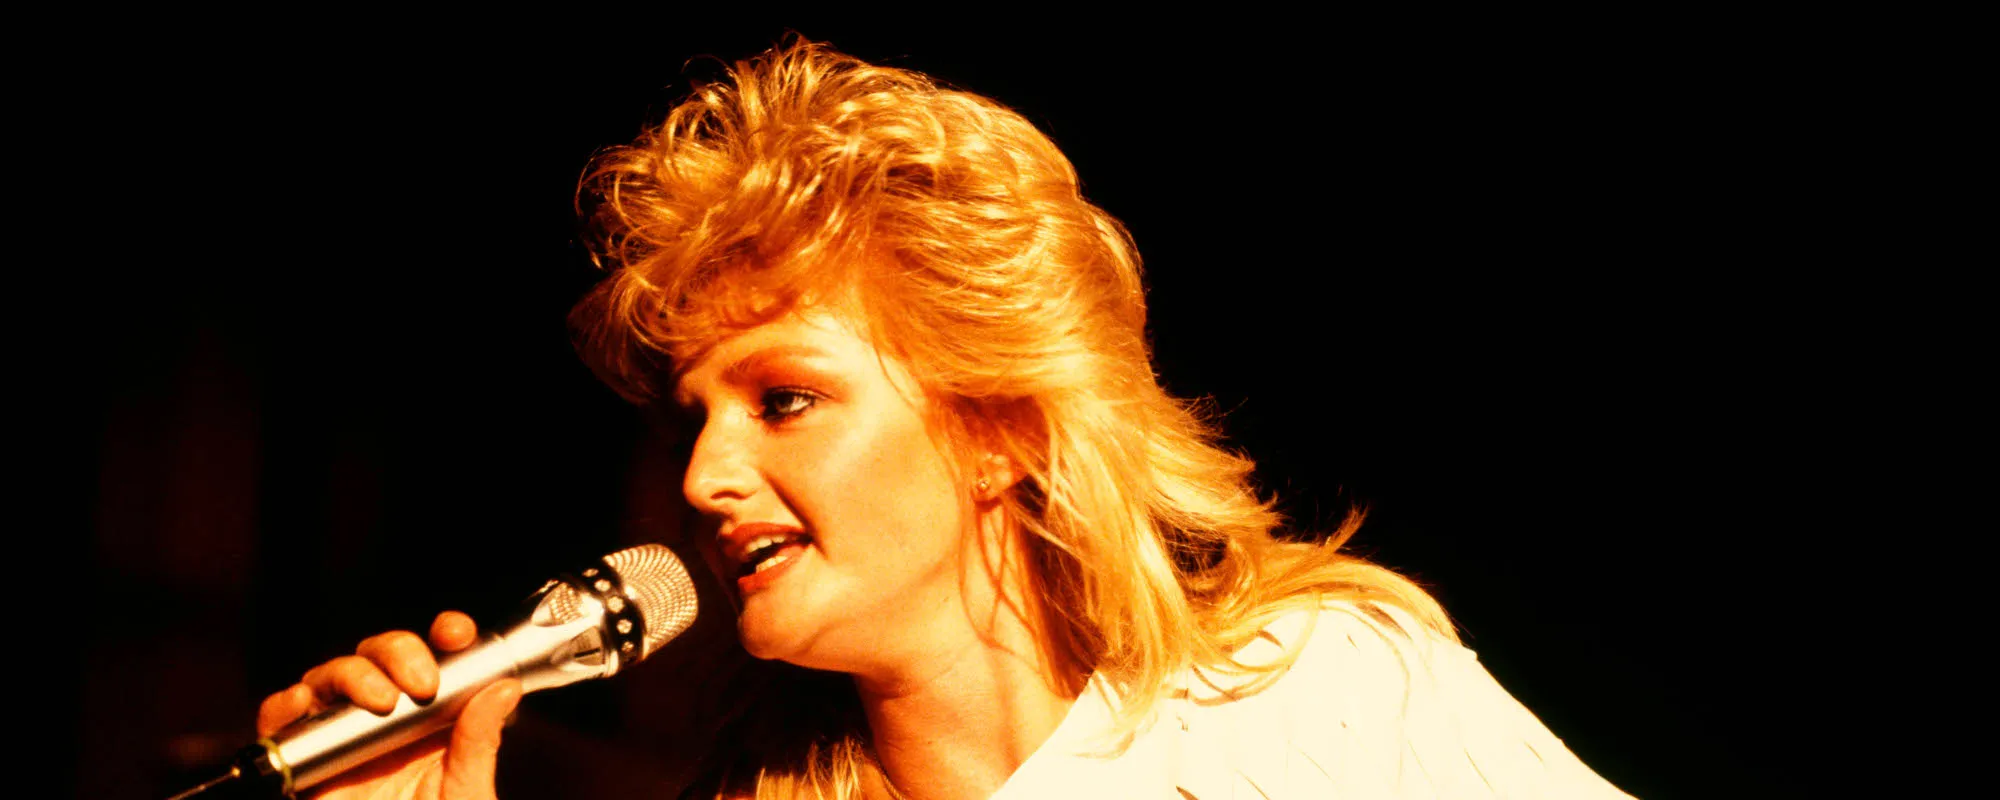 Did You Know?: The Blood Sucking Truth Behind Bonnie Tyler’s “Total Eclipse of the Heart”